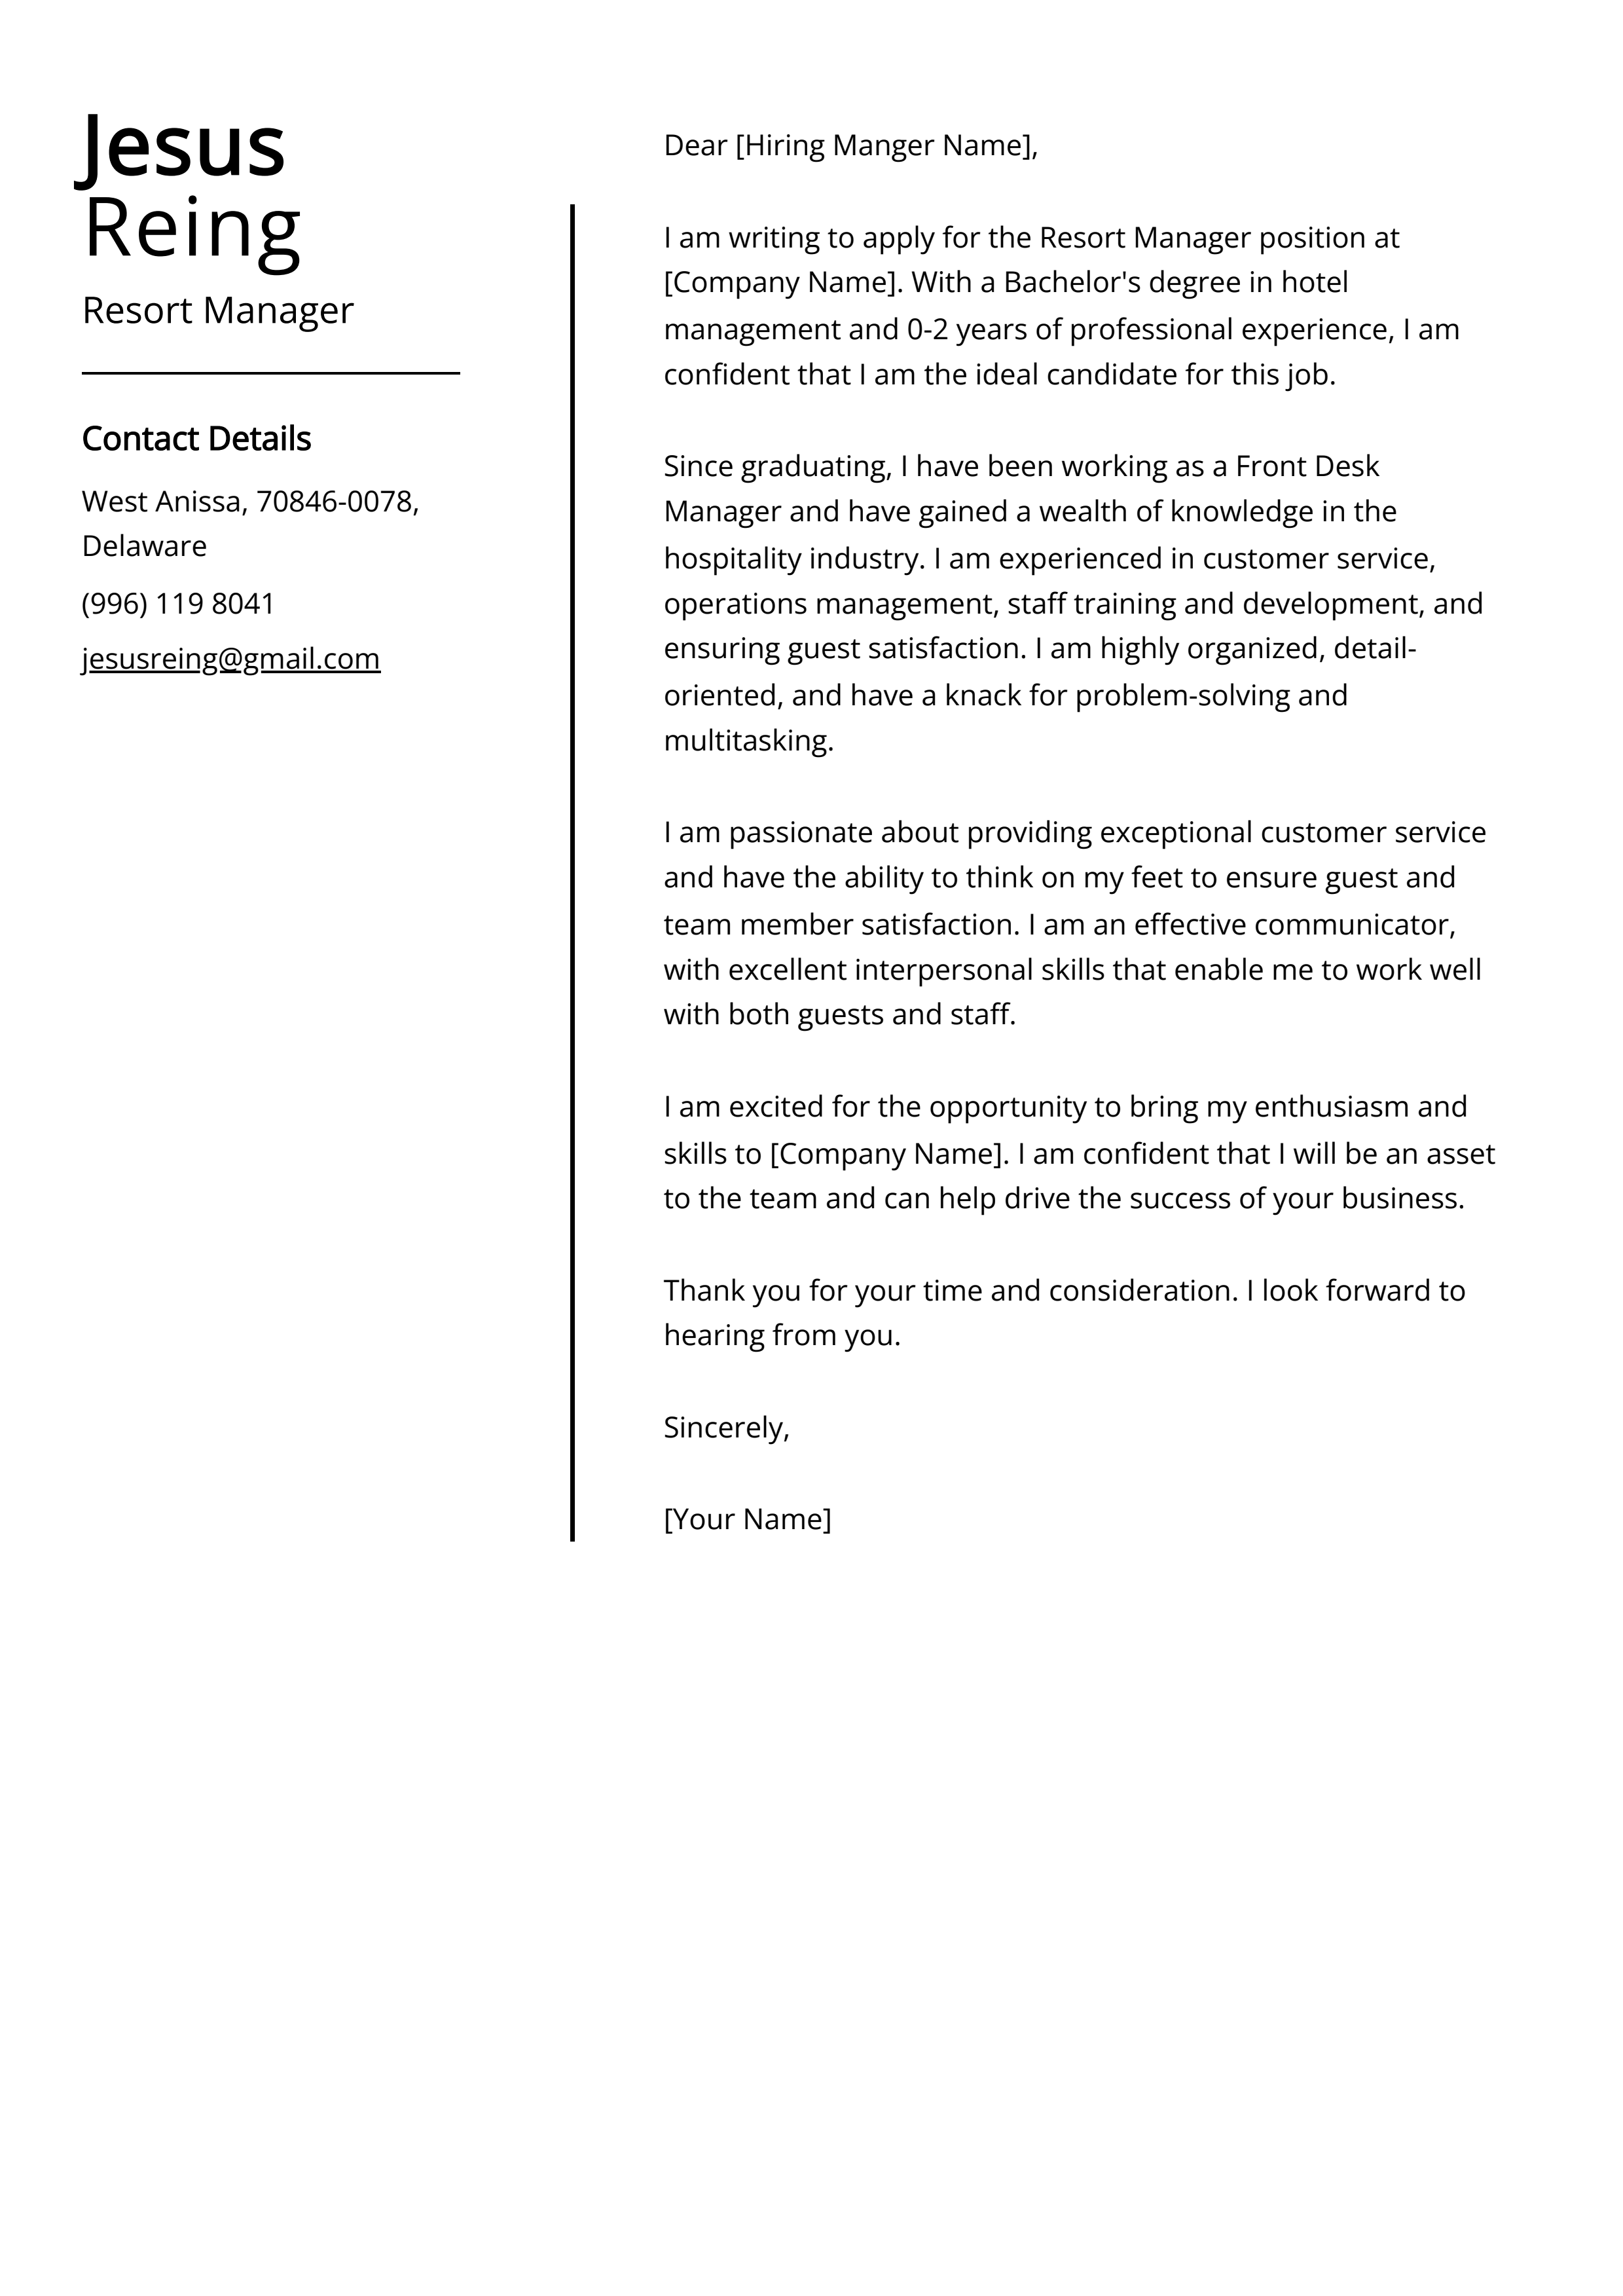 Resort Manager Cover Letter Example